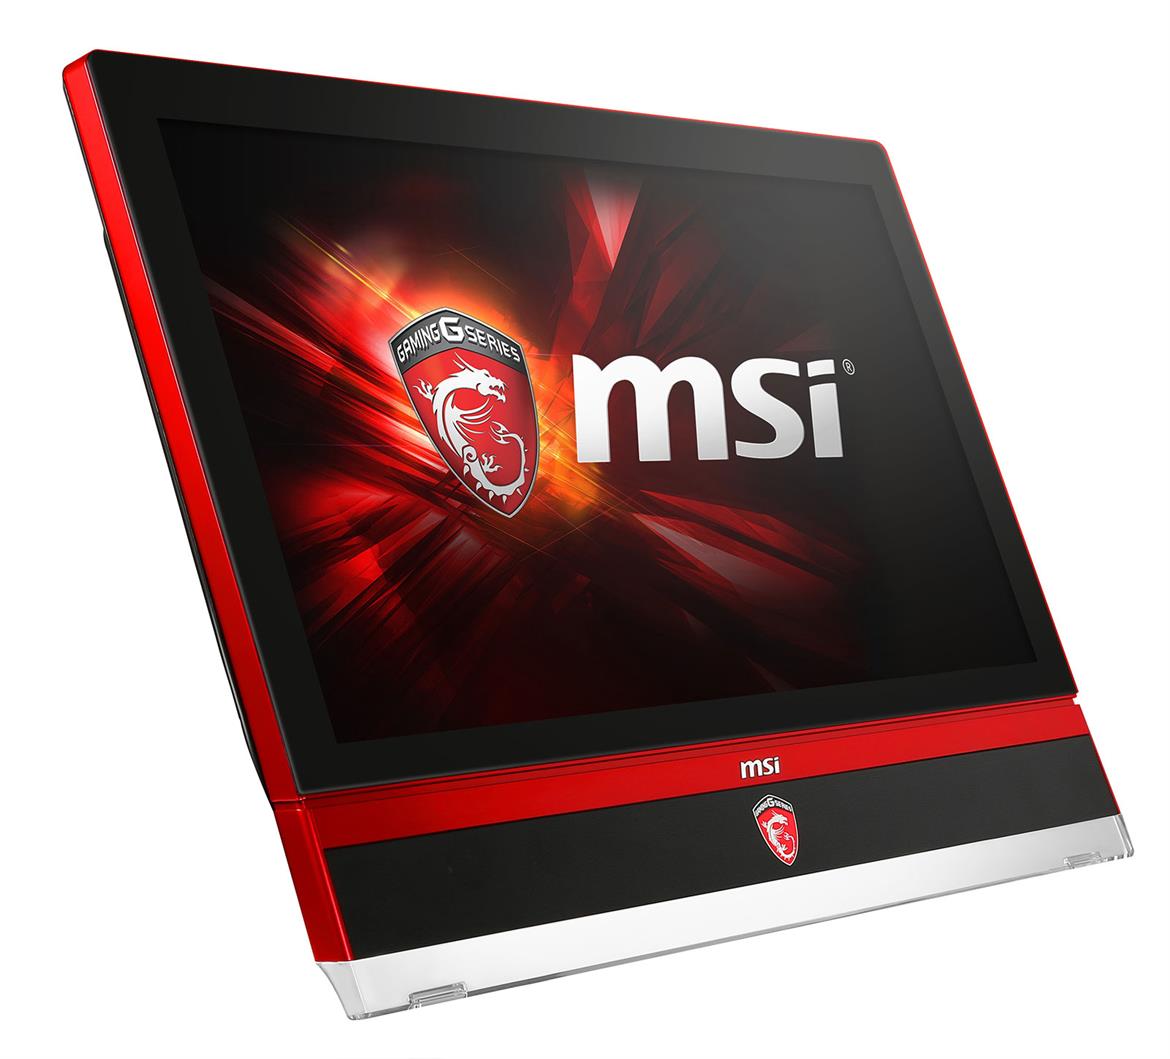 MSI Gaming 27T Windows 10 All-in-One Kicks Ass, Takes Names With Core i7, GTX 980M Graphics